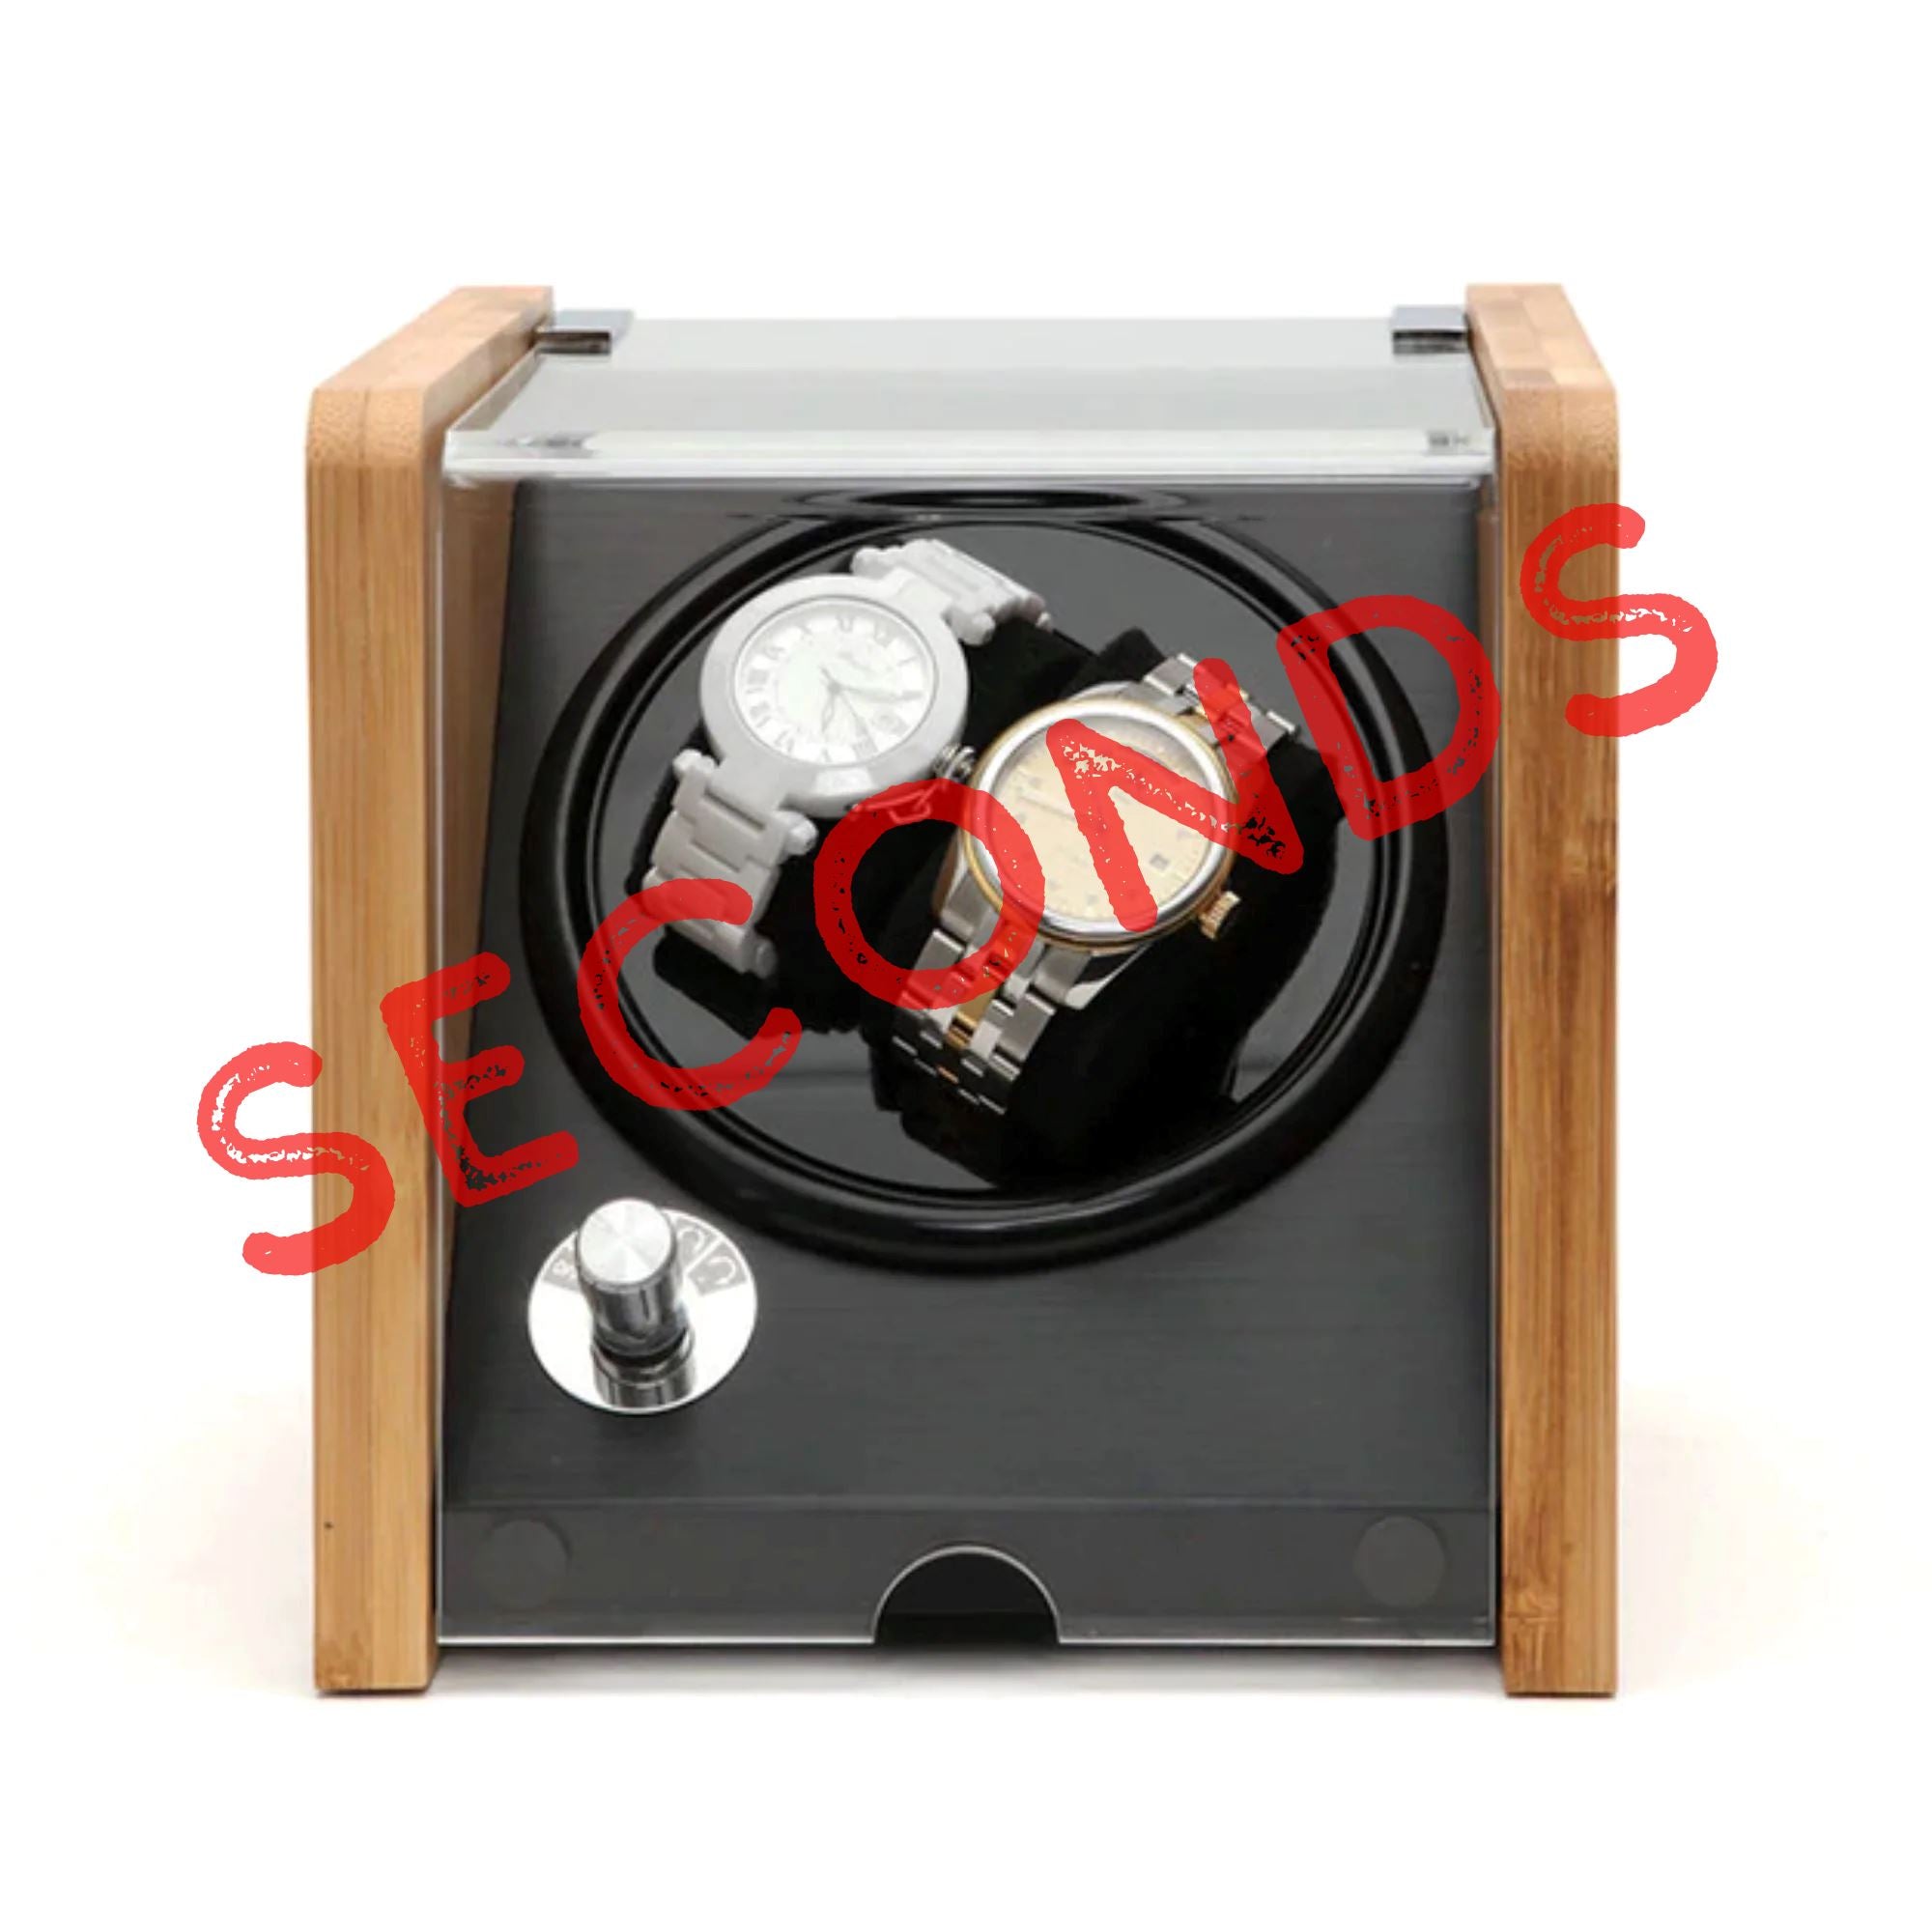 Seconds - BLAQ Bamboo/Black Watch Winder Box for 2 Watches (a) Seconds Clinks 